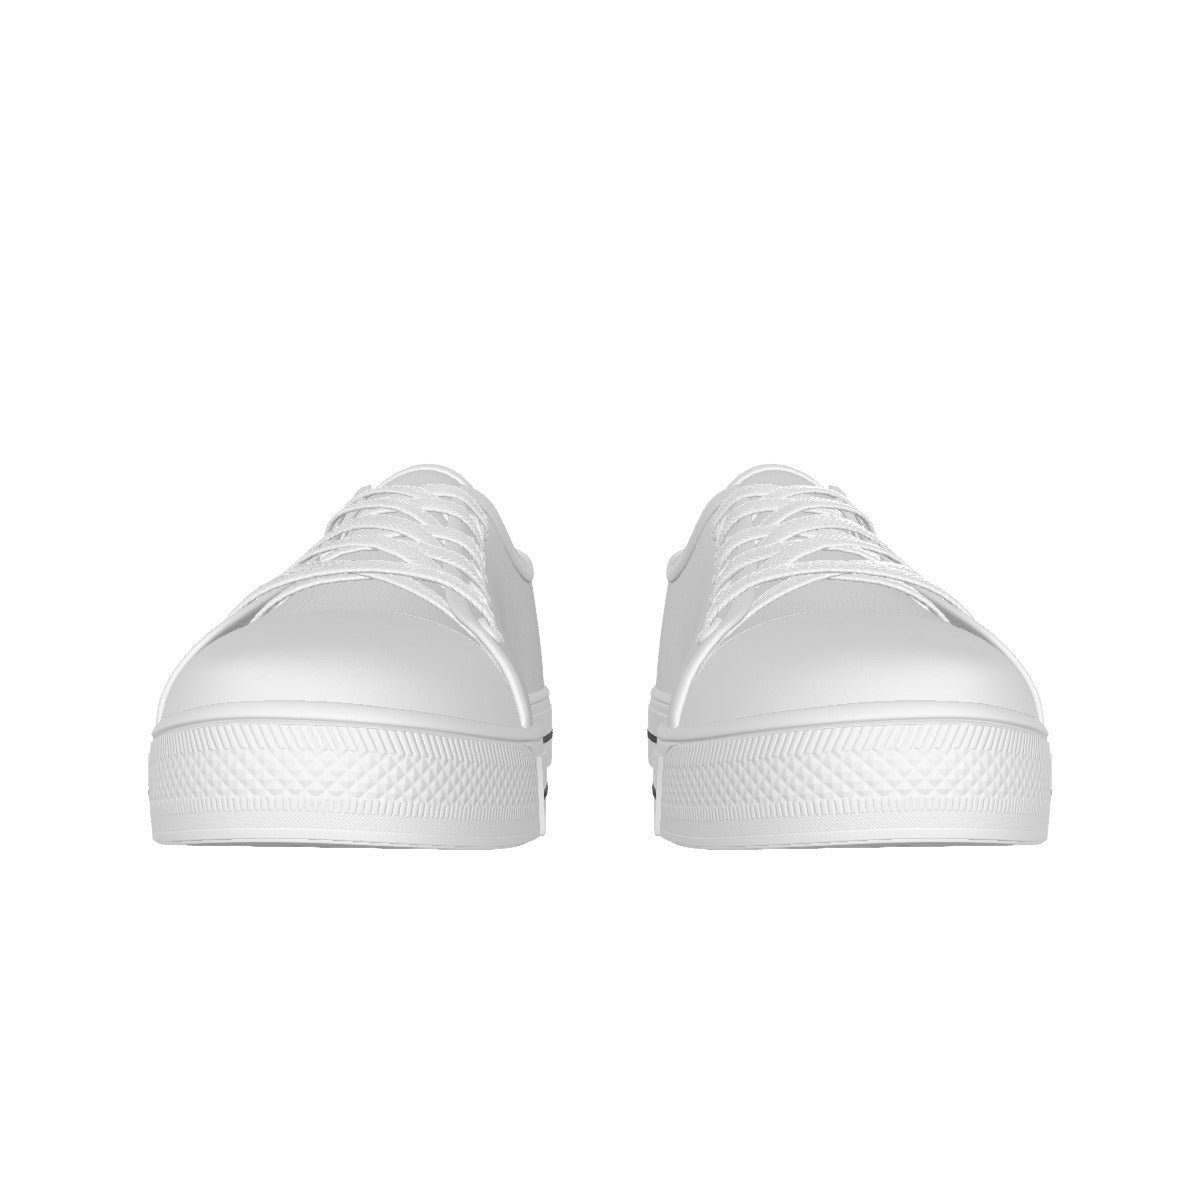 Personalized White Sole Canvas Shoes